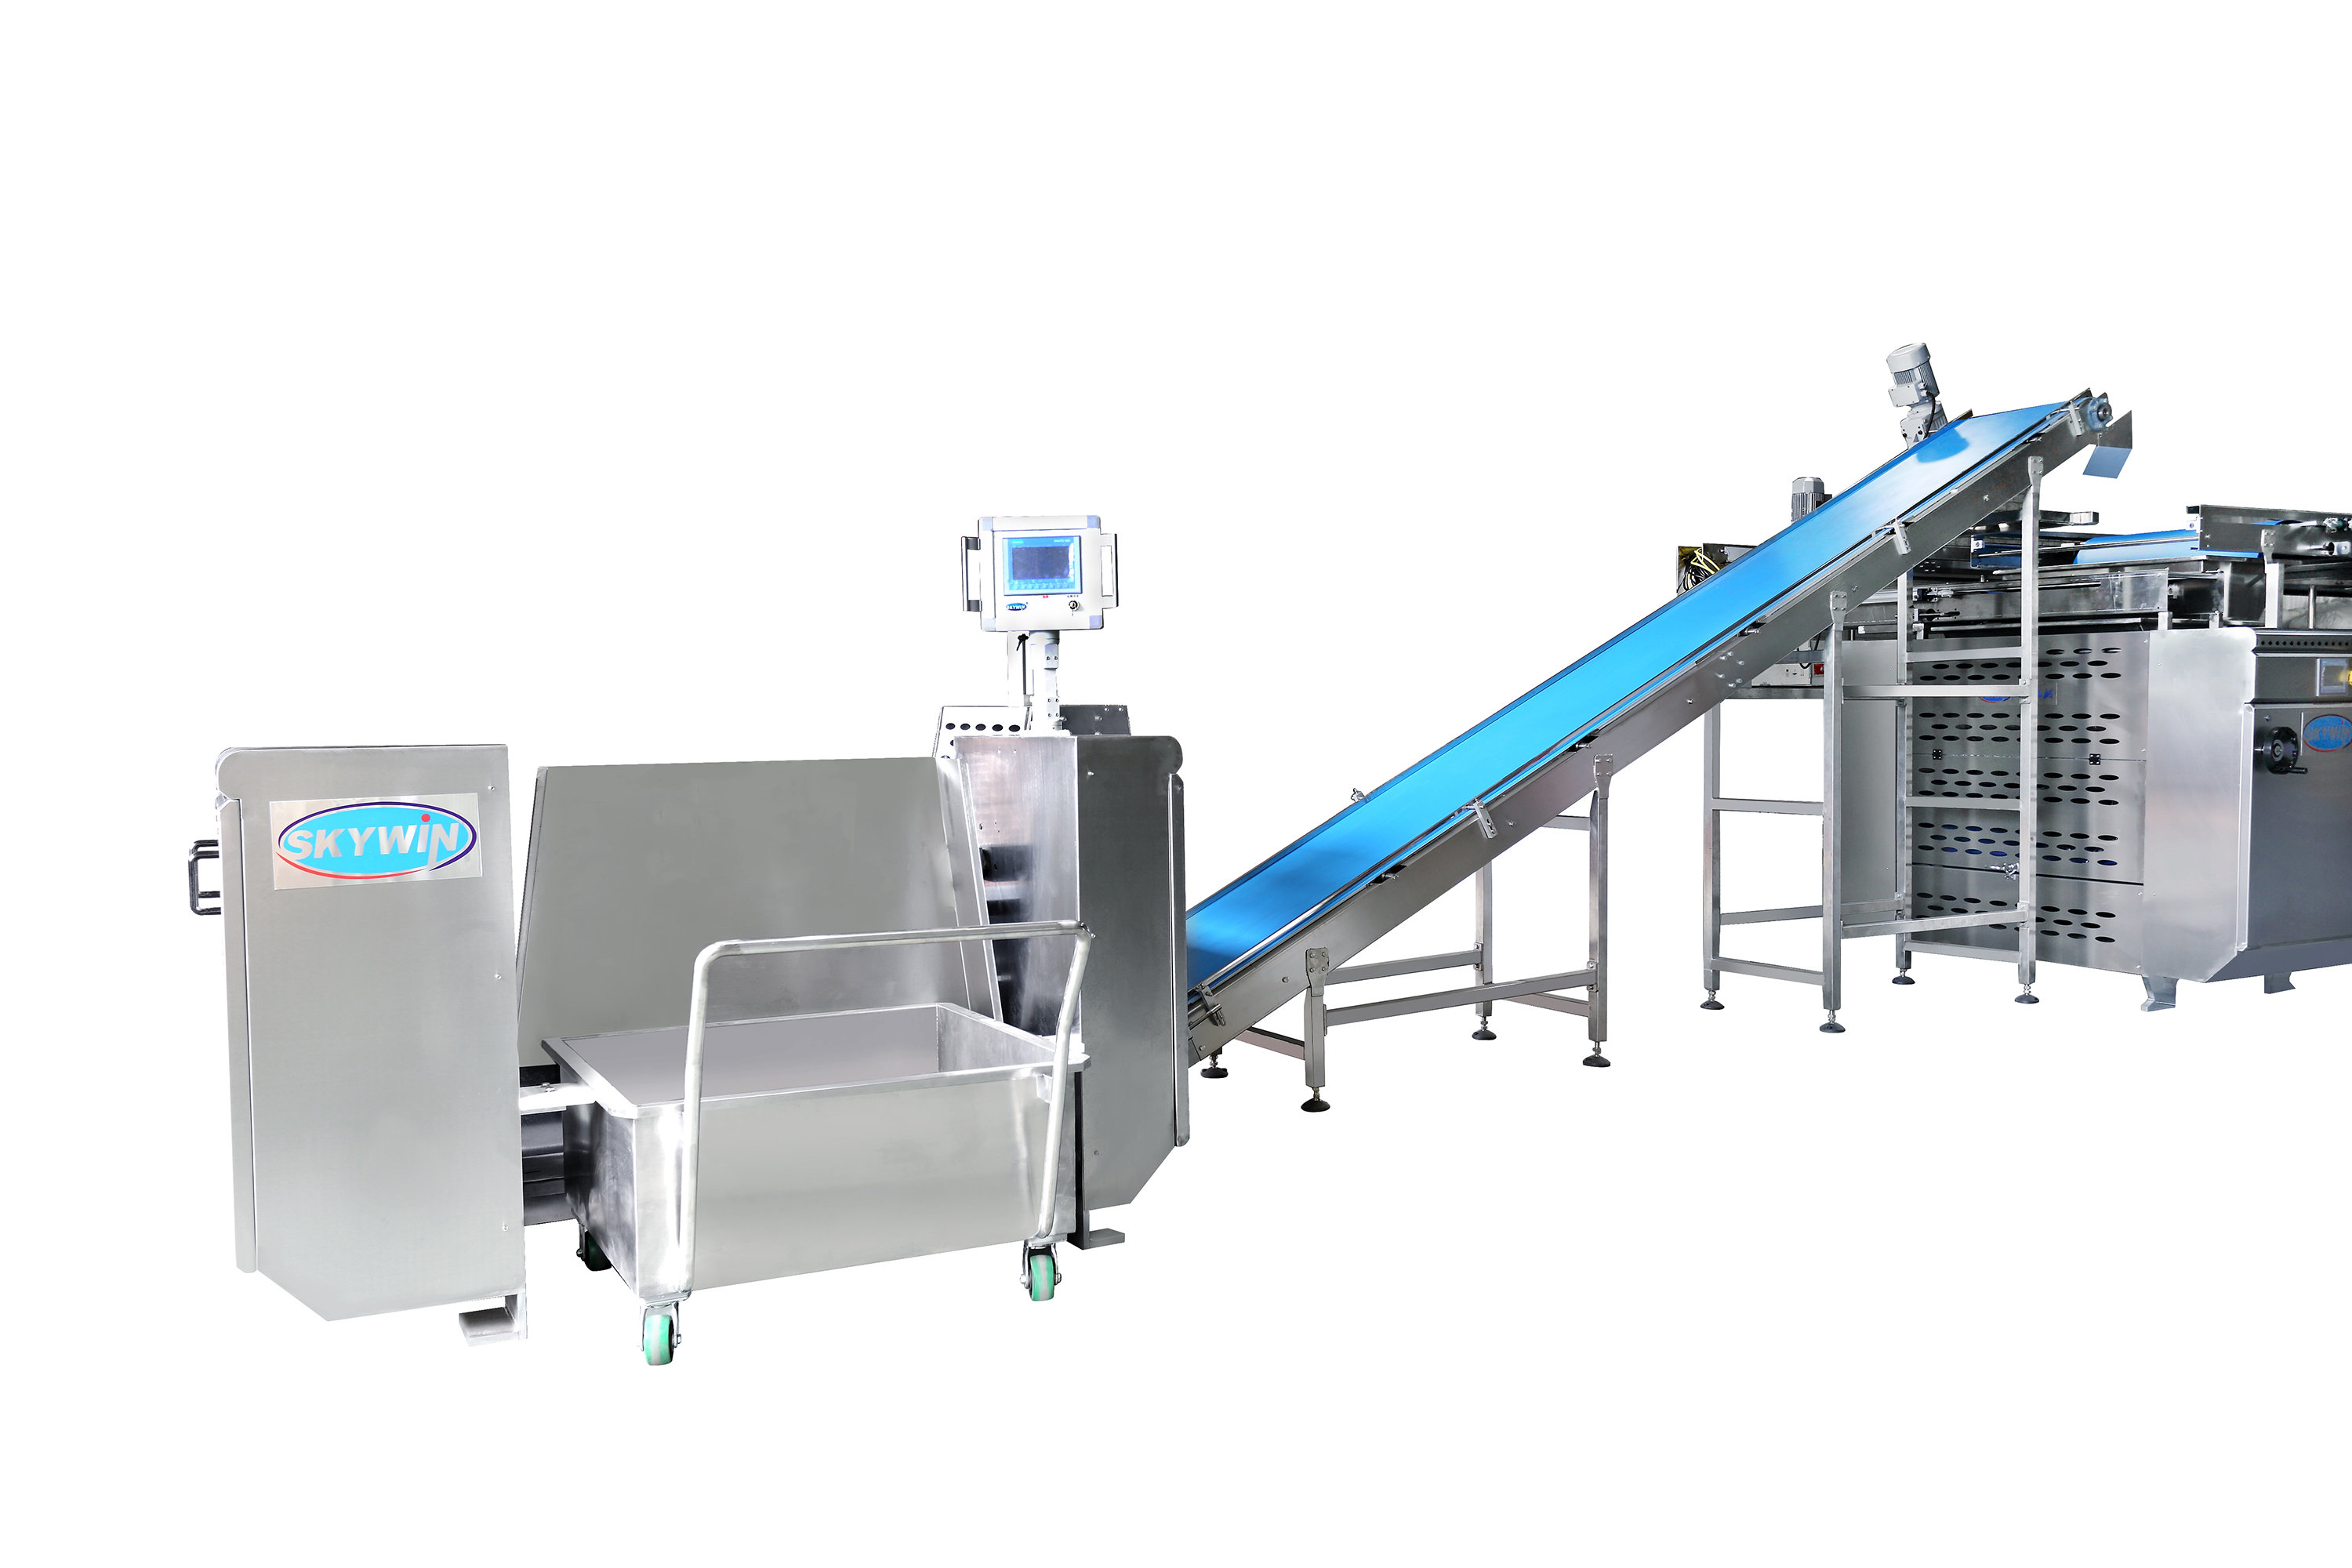 Automatic tipper and dough feeding for hard and soft dough